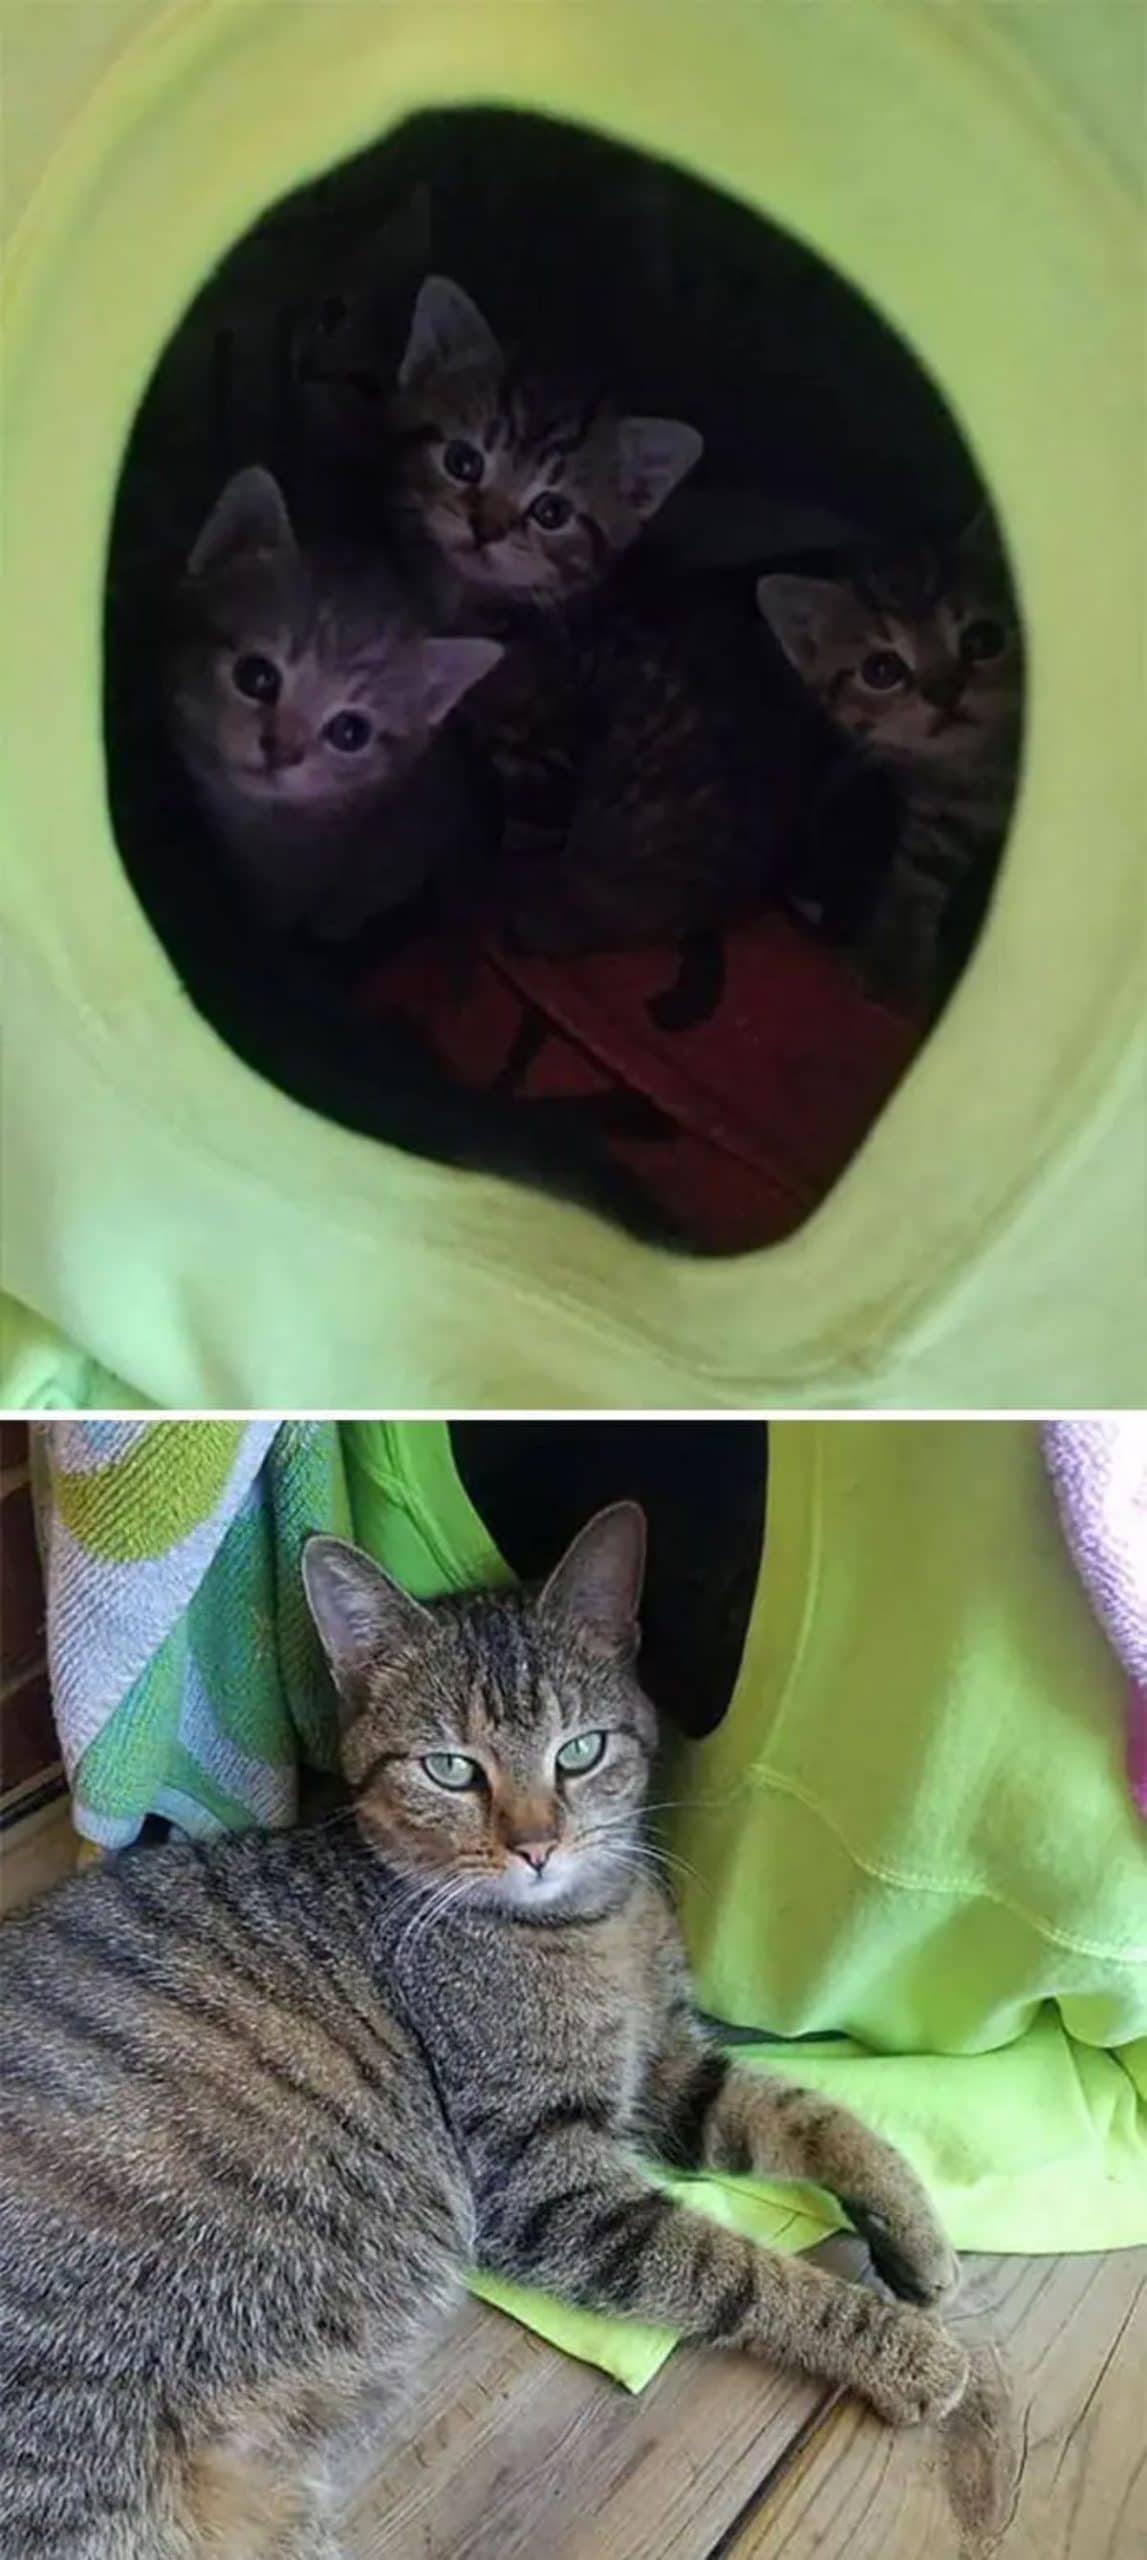 2 photos of a 3 tabby kittens inside a yellow carrier and another photo of a grey tabby cat laying on the floor next to the carrier